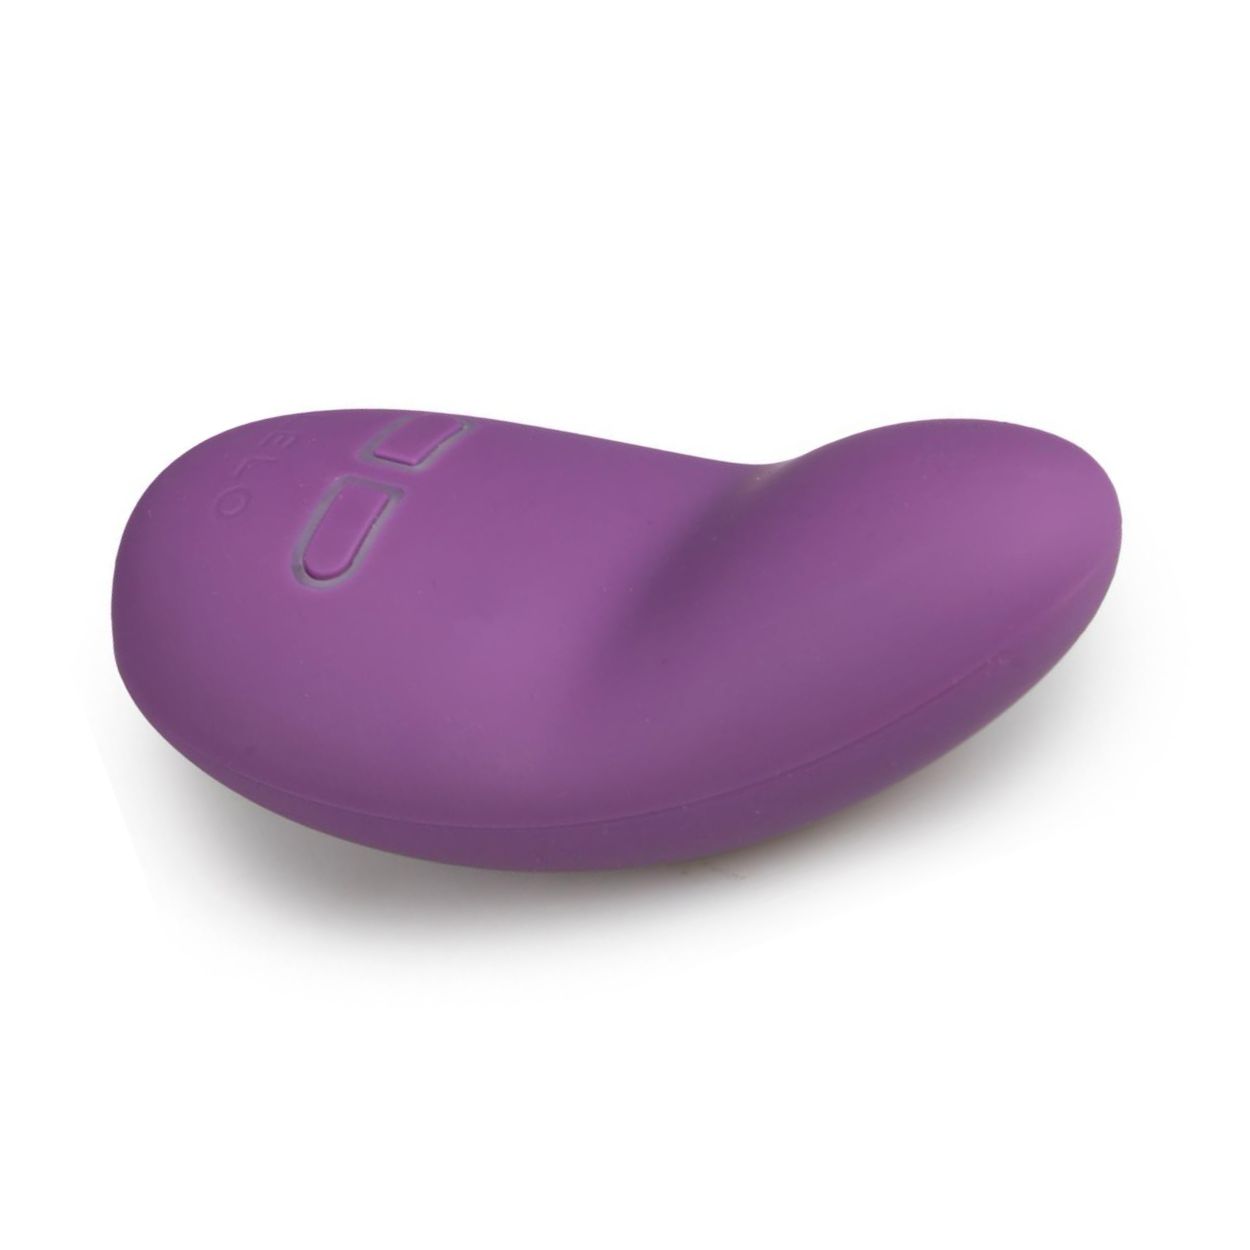 Vibrator Lelo Lily 2 (Bordeaux And Chocolate) Mov